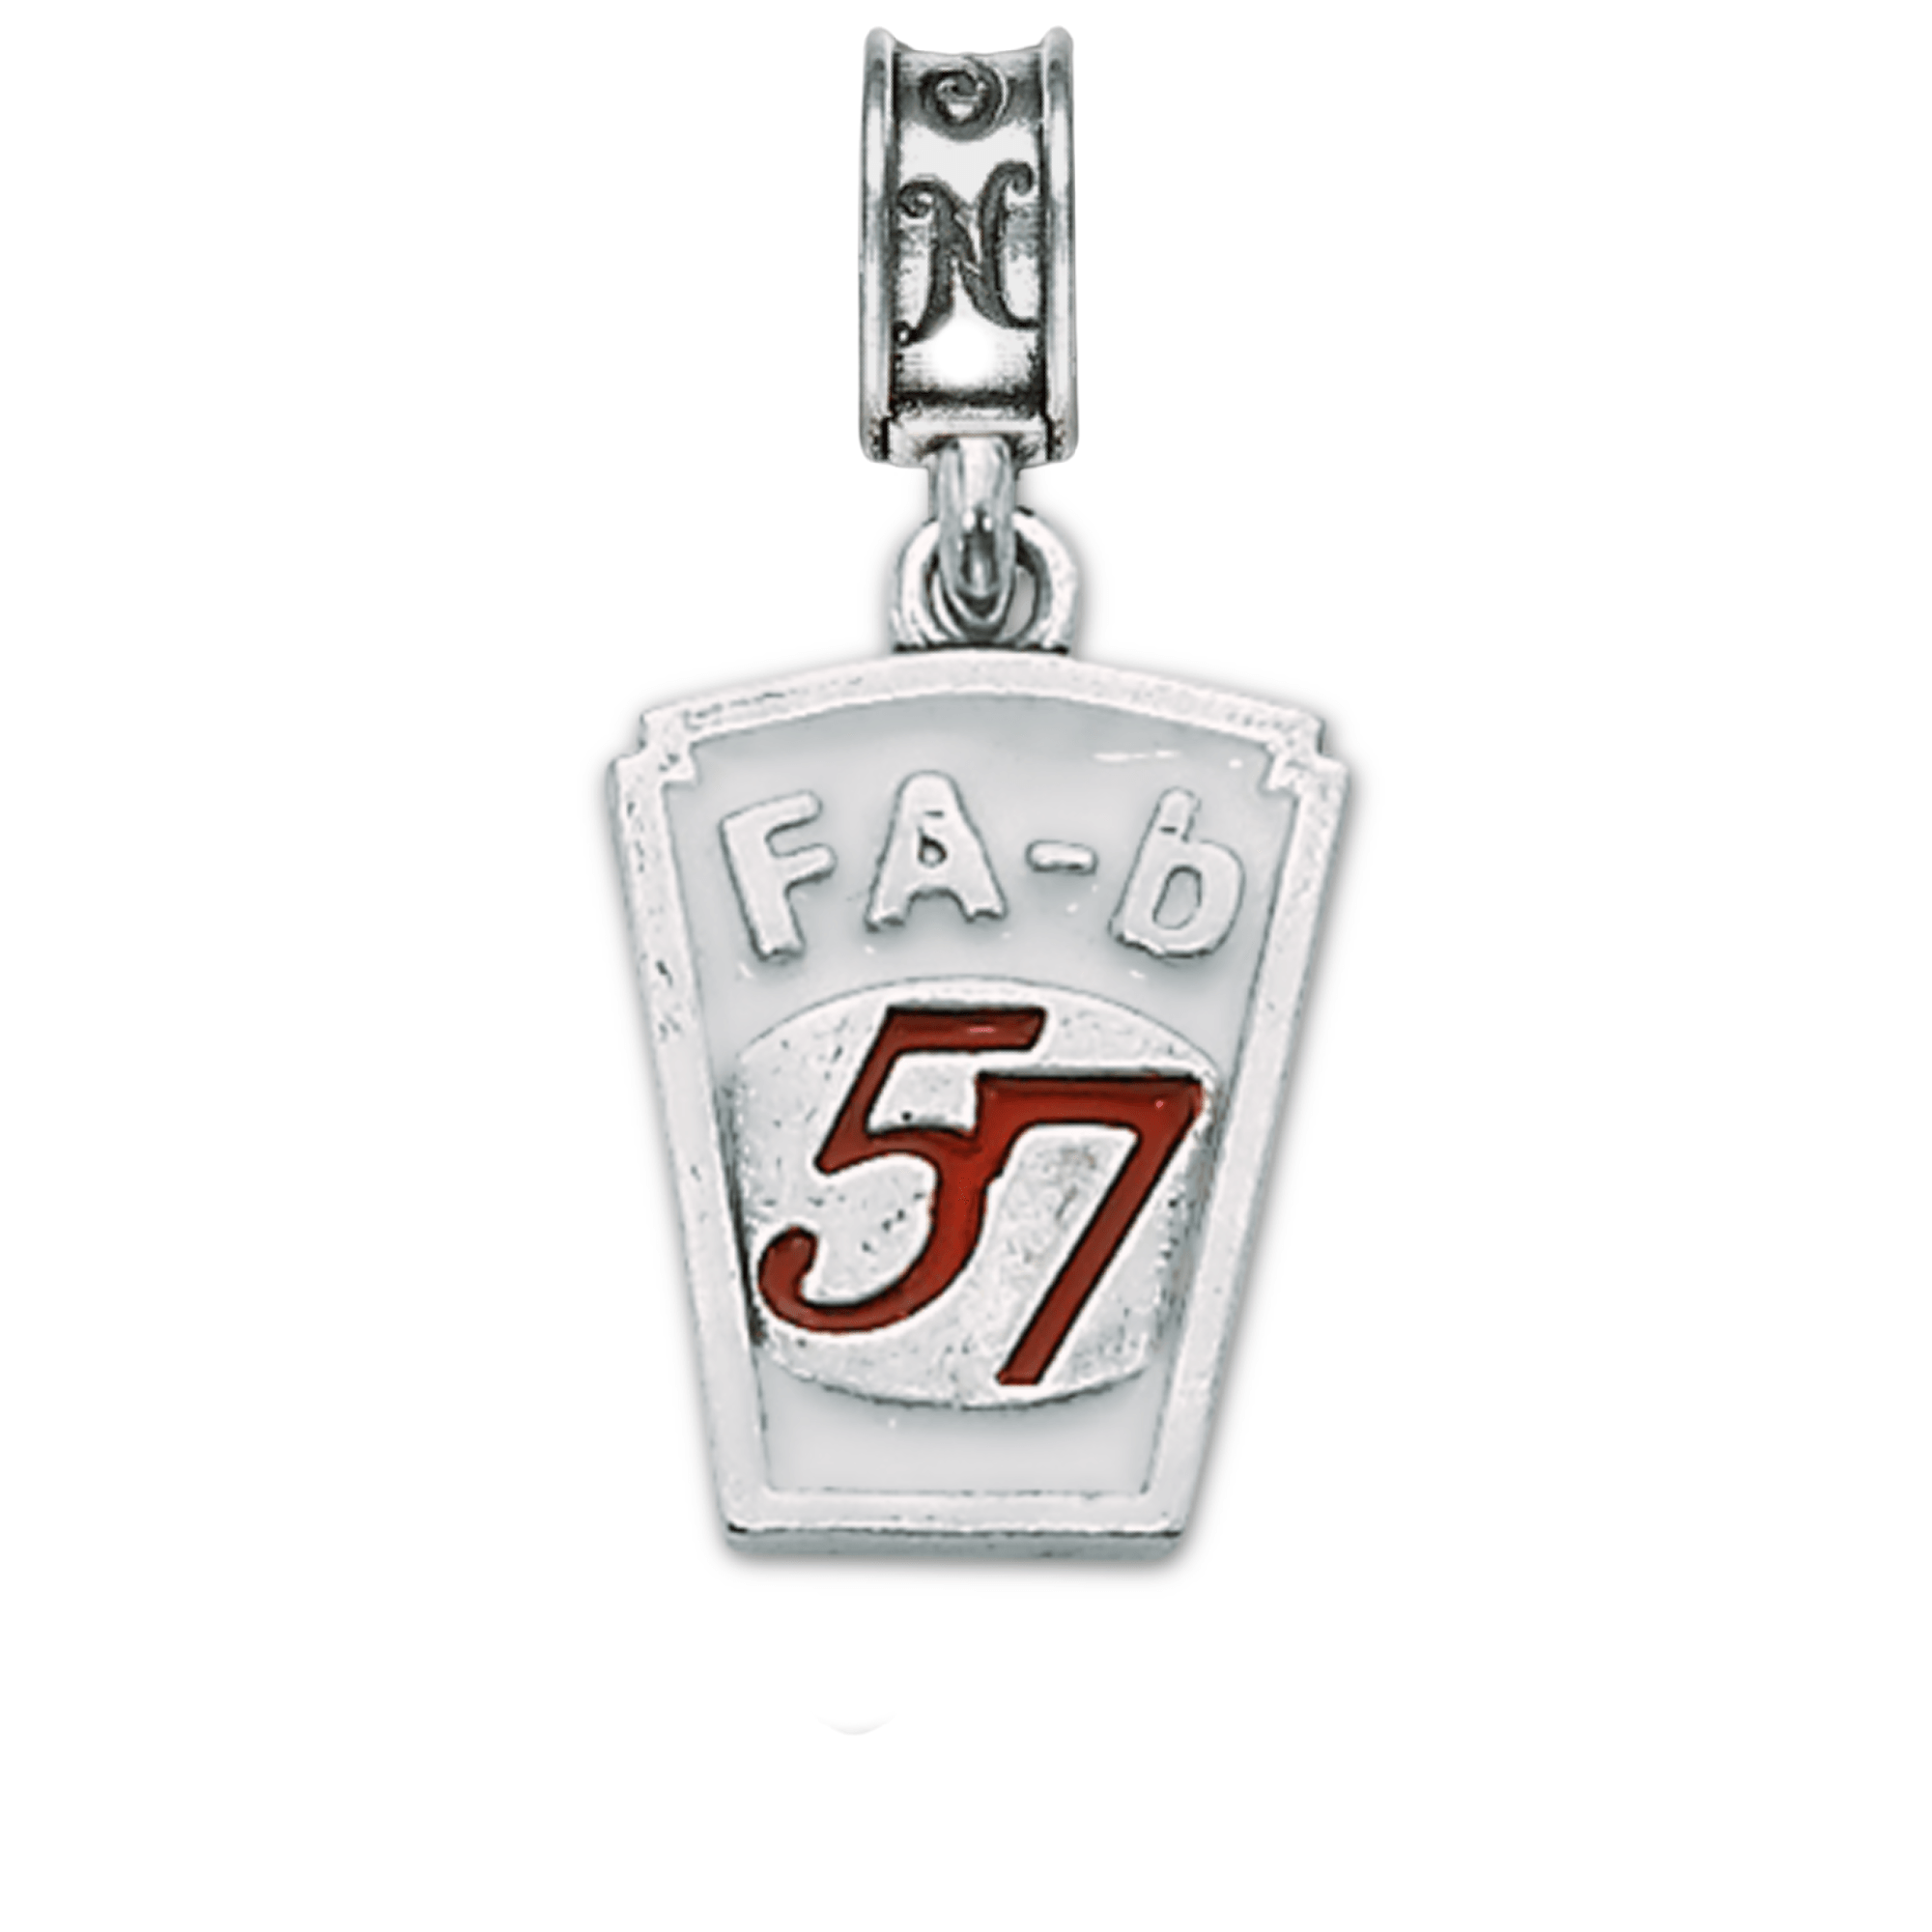 Military Jewelry, Military Charms, United States Army, Military Gifts, FA-b 57